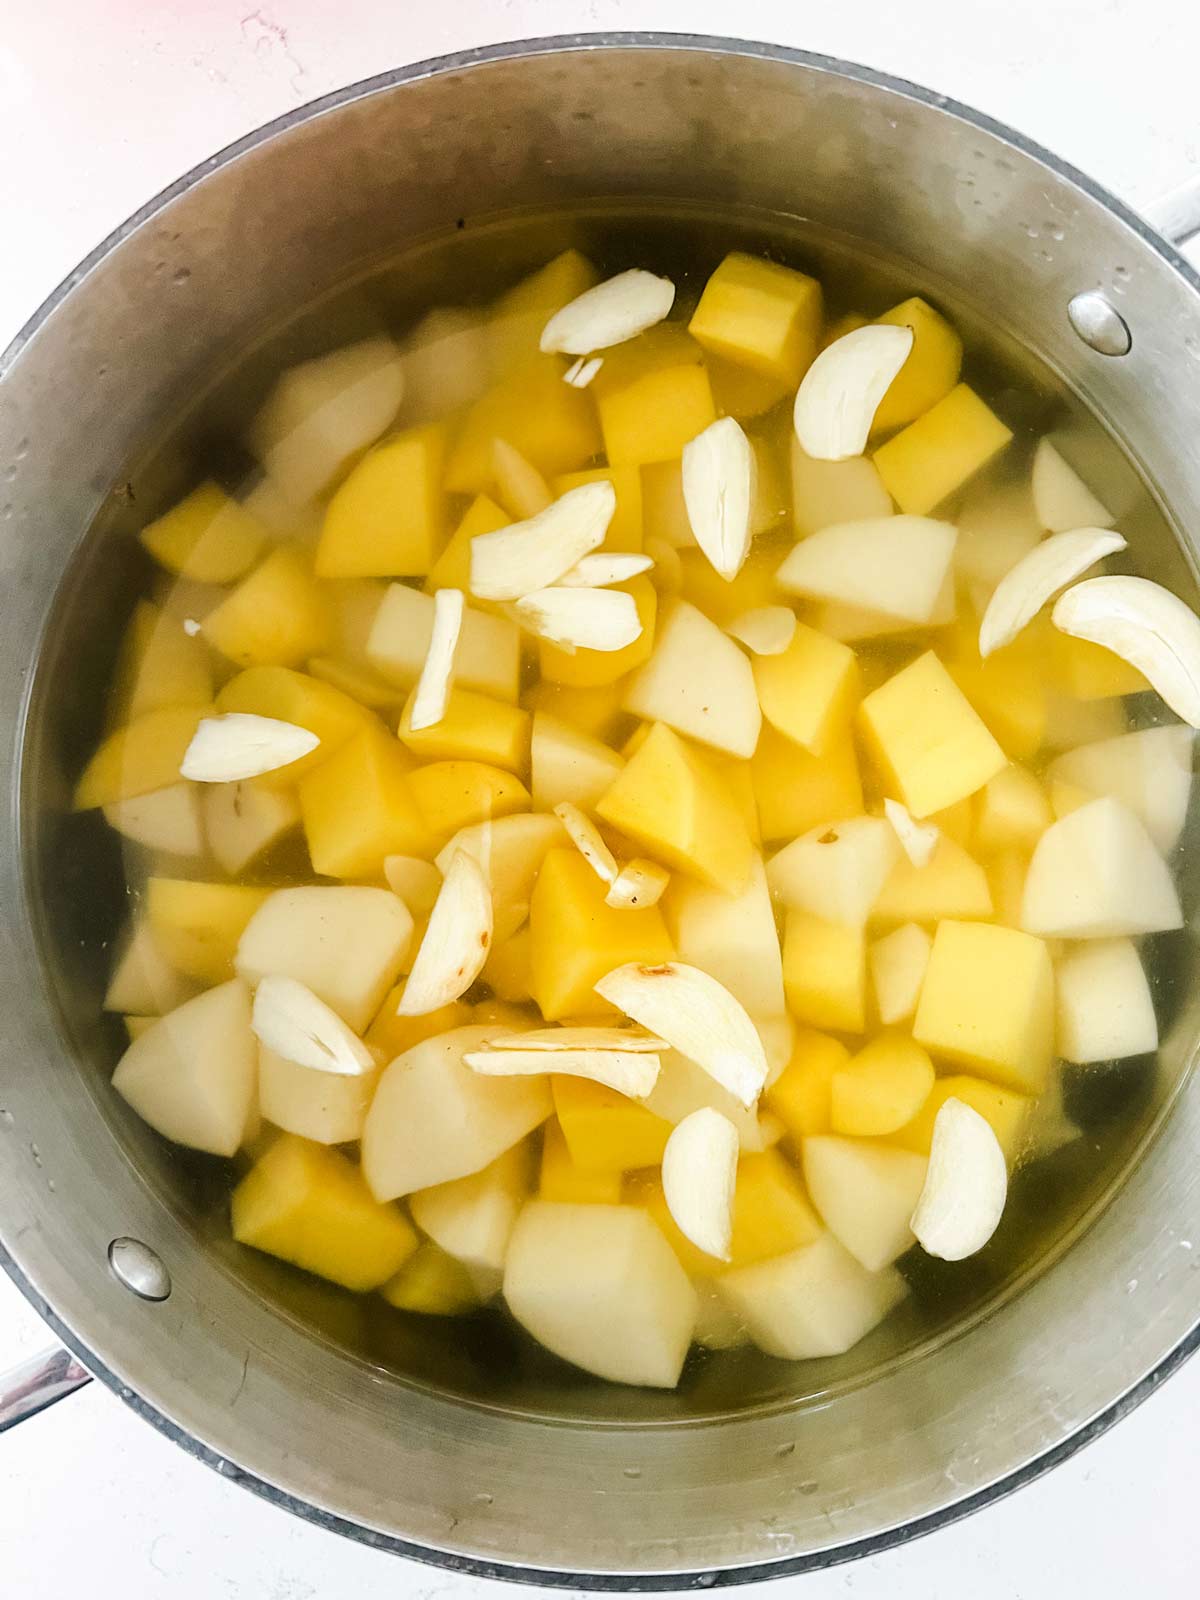 Diced potatoes and garlic in a pot of water.